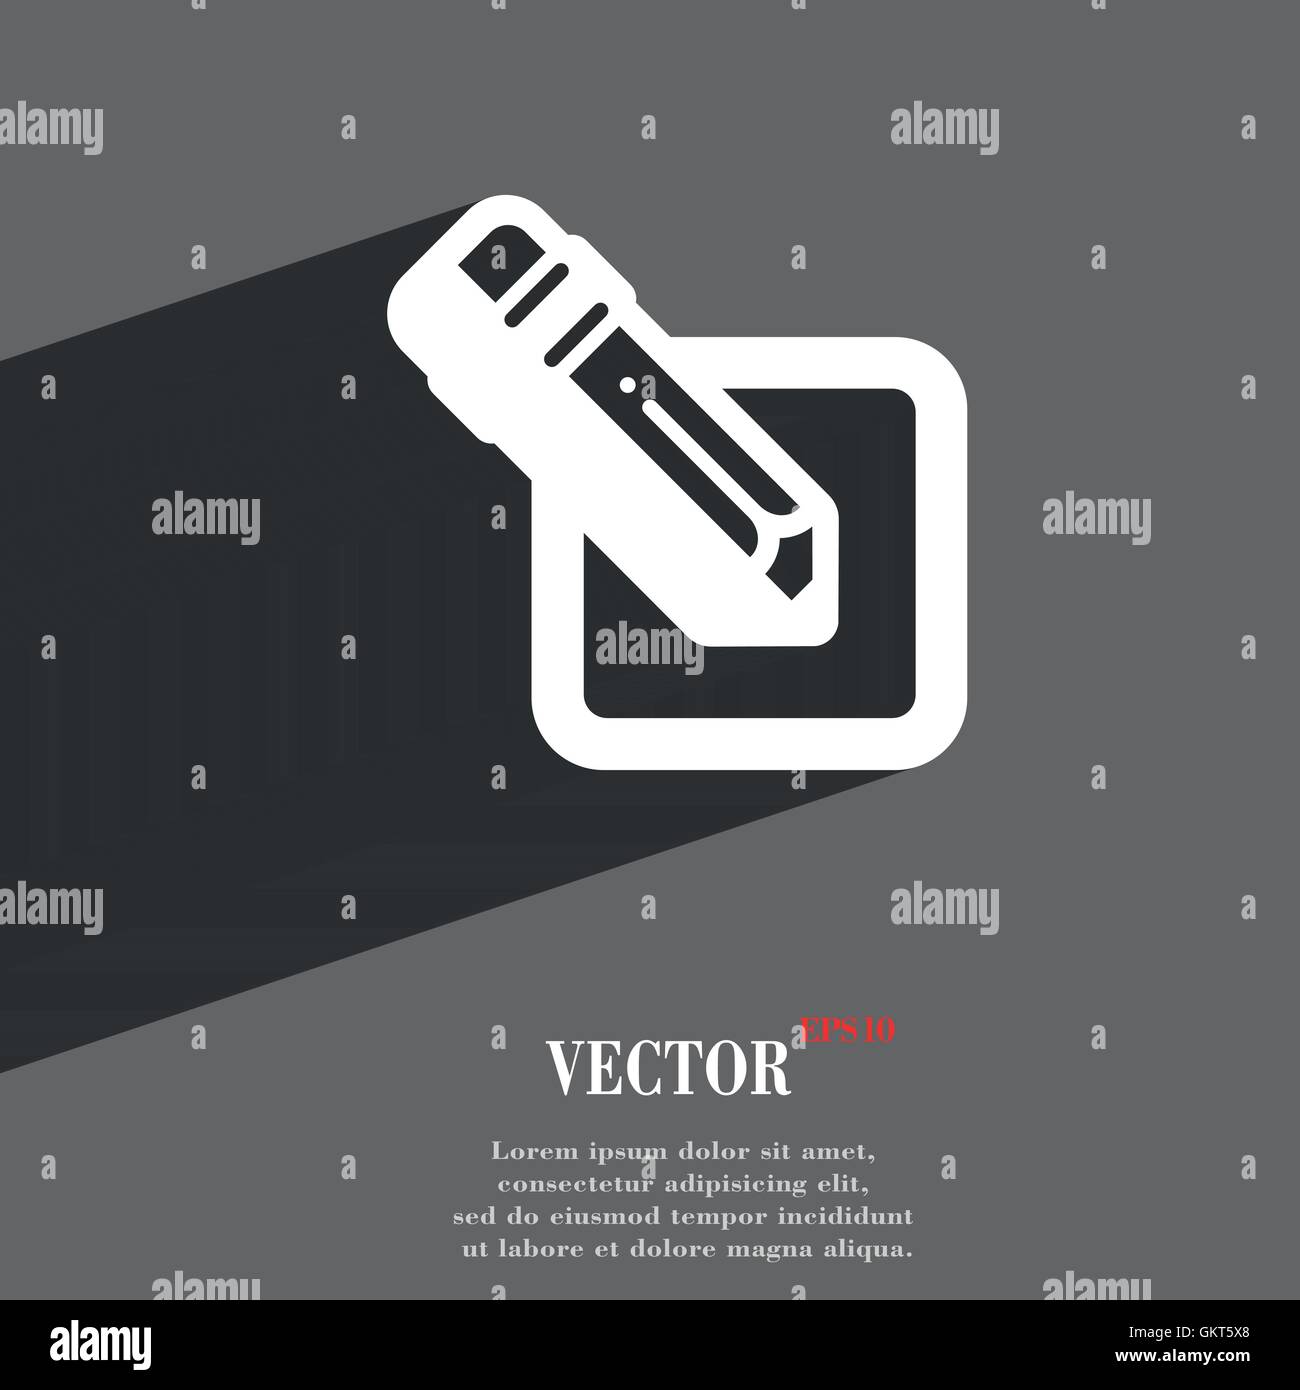 pencil icon symbol Flat modern web design with long shadow and space for your text. Vector Stock Vector